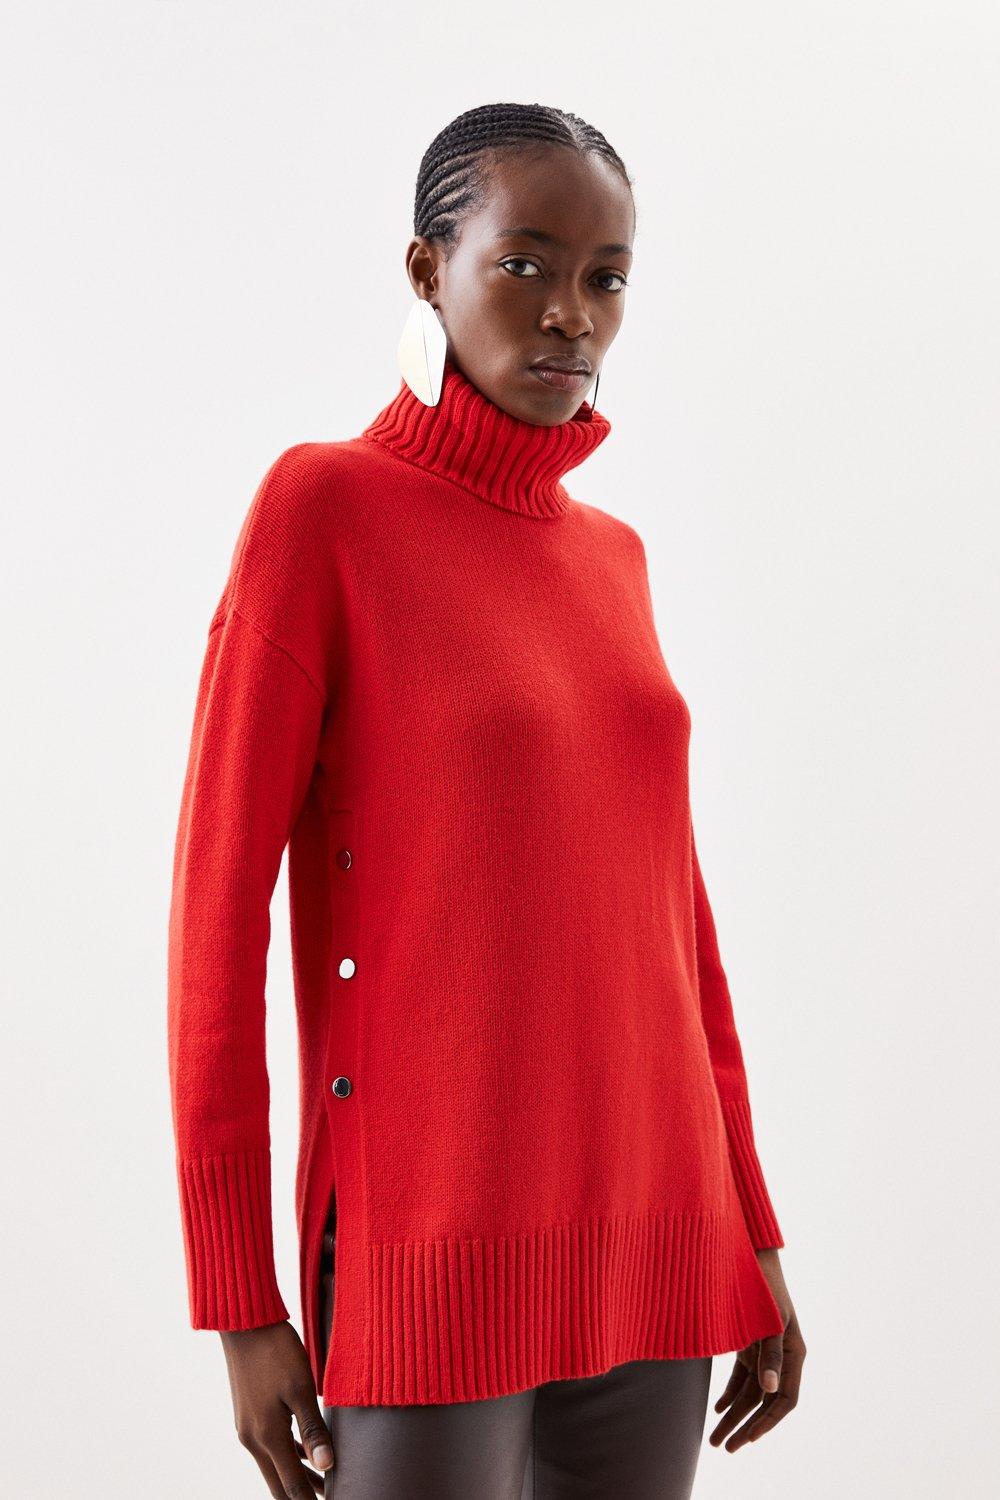 Women's Jumpers, Knitted Jumpers